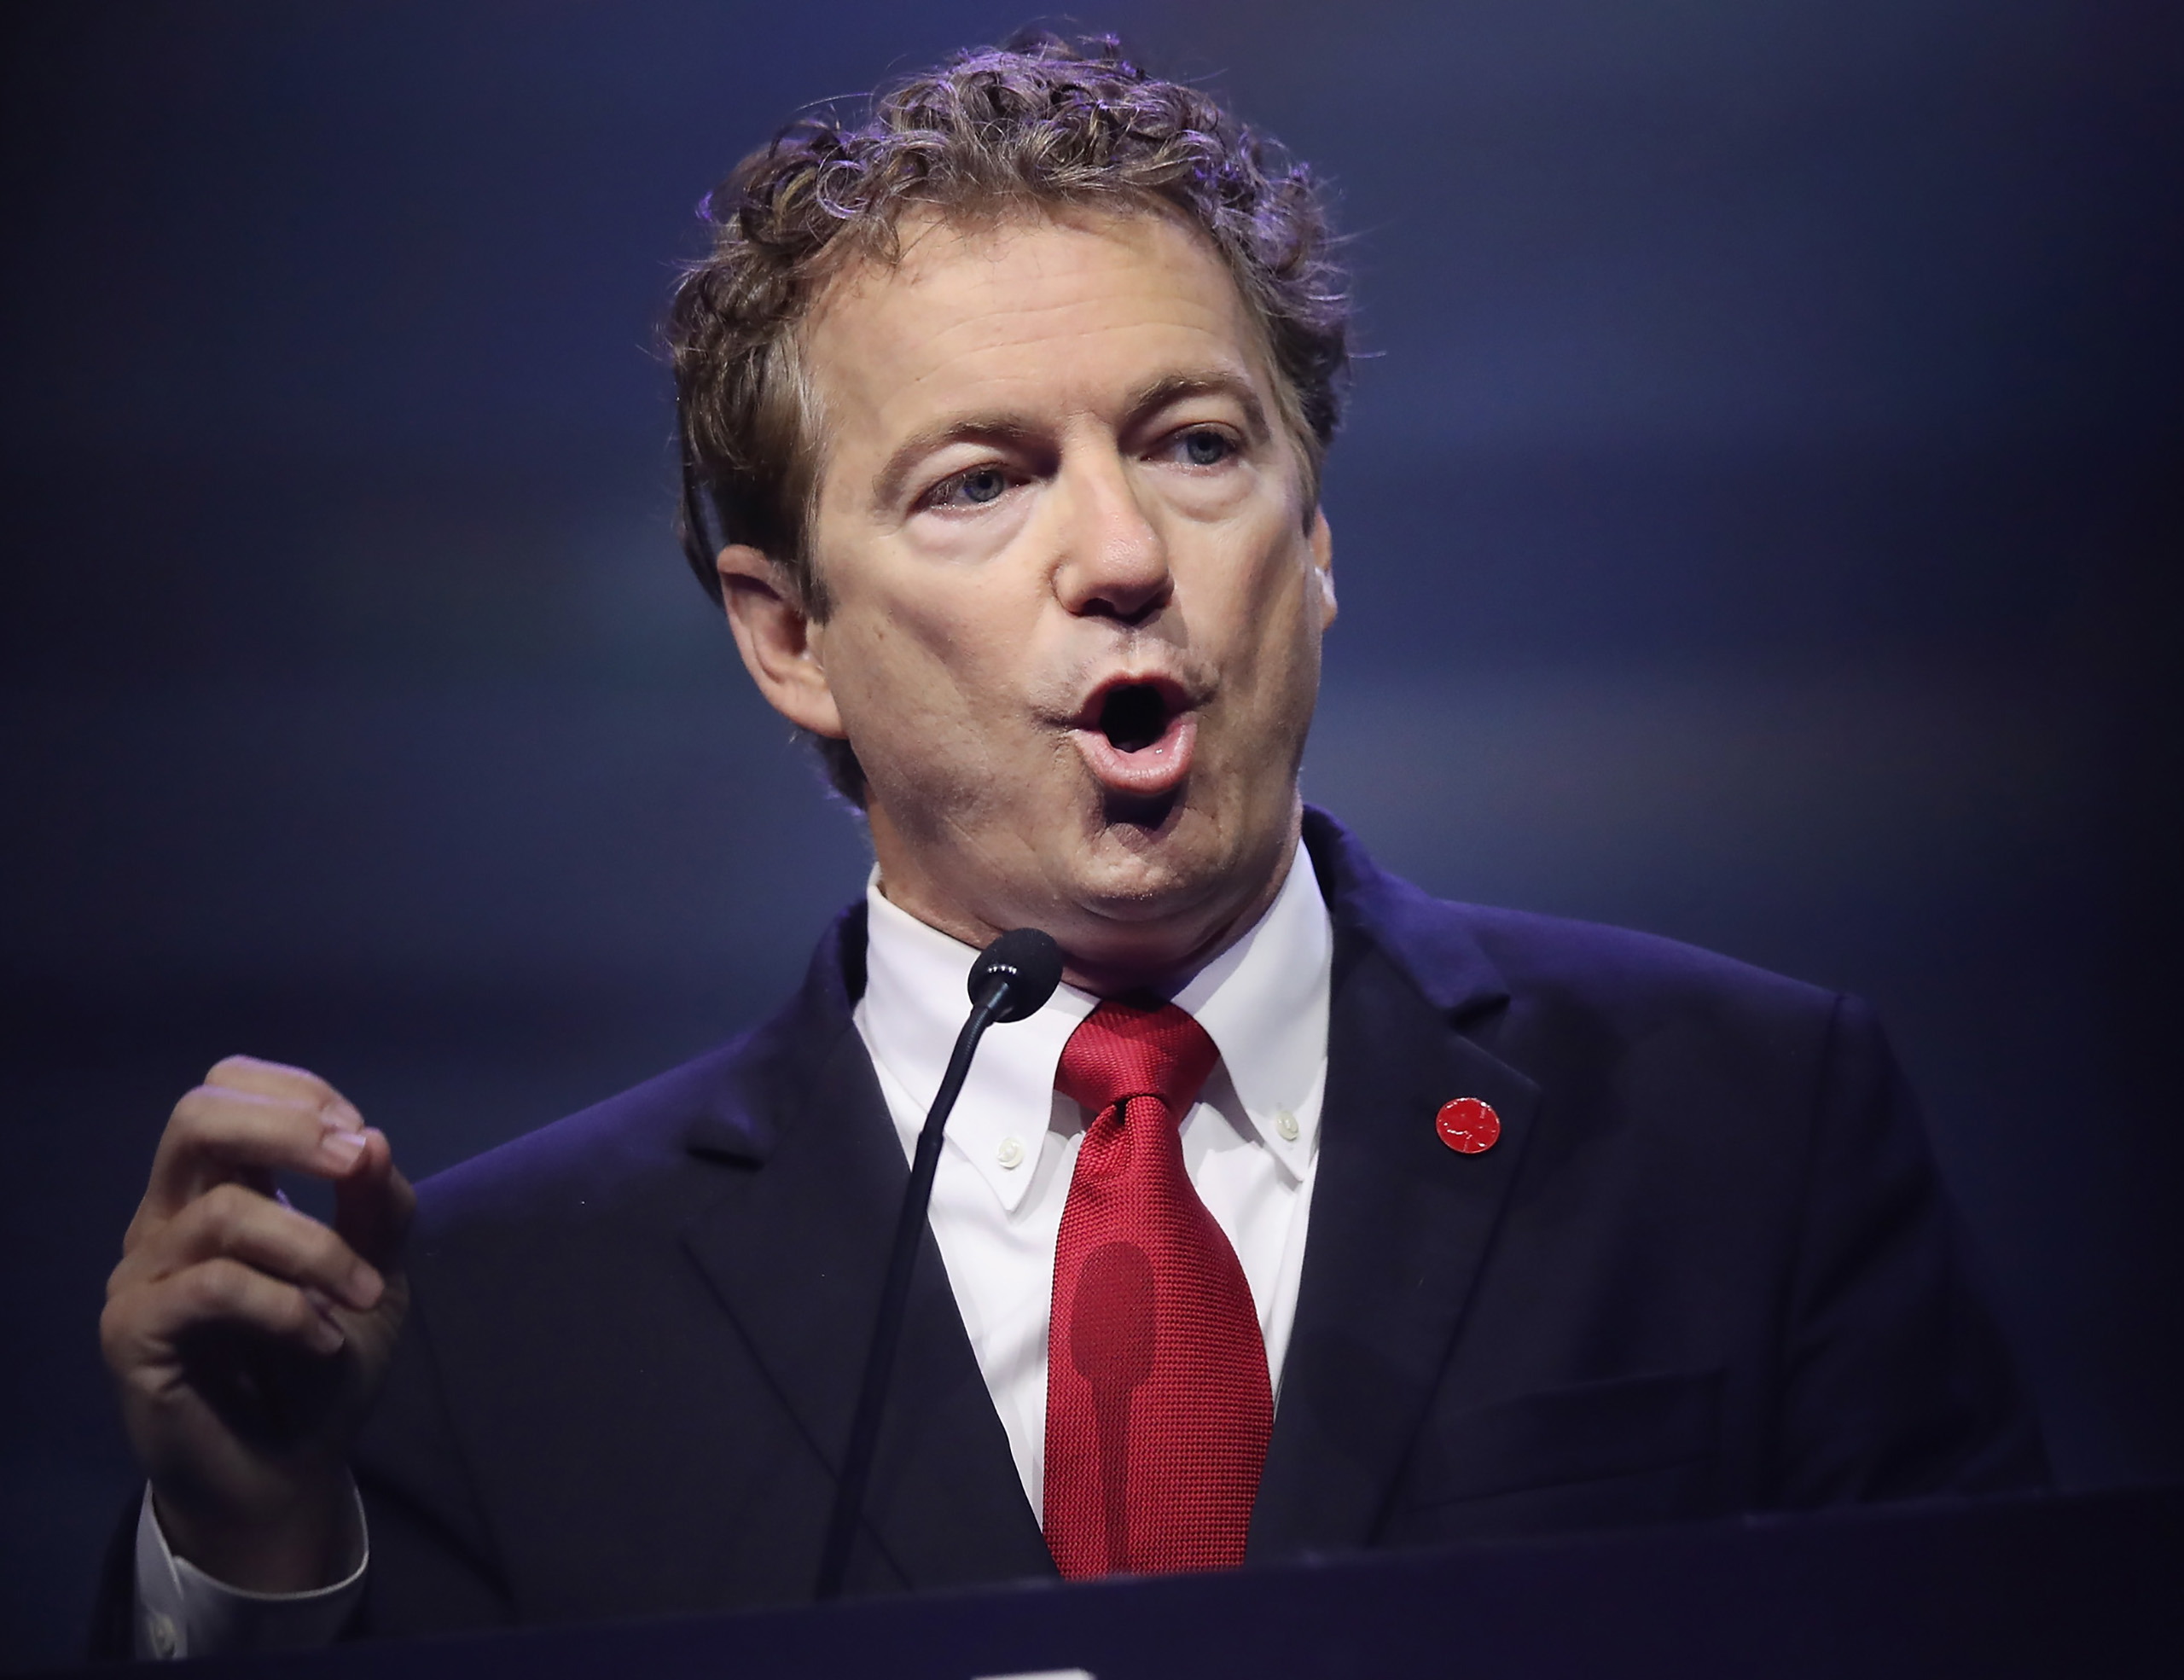 Sen. Rand Paul speaks at the National Rifle Association's NRA-ILA Leadership Forum during the NRA Convention at the Kentucky Exposition Center in Louisville, Kentucky on May 20, 2016. (Scott Olson—Getty Images)